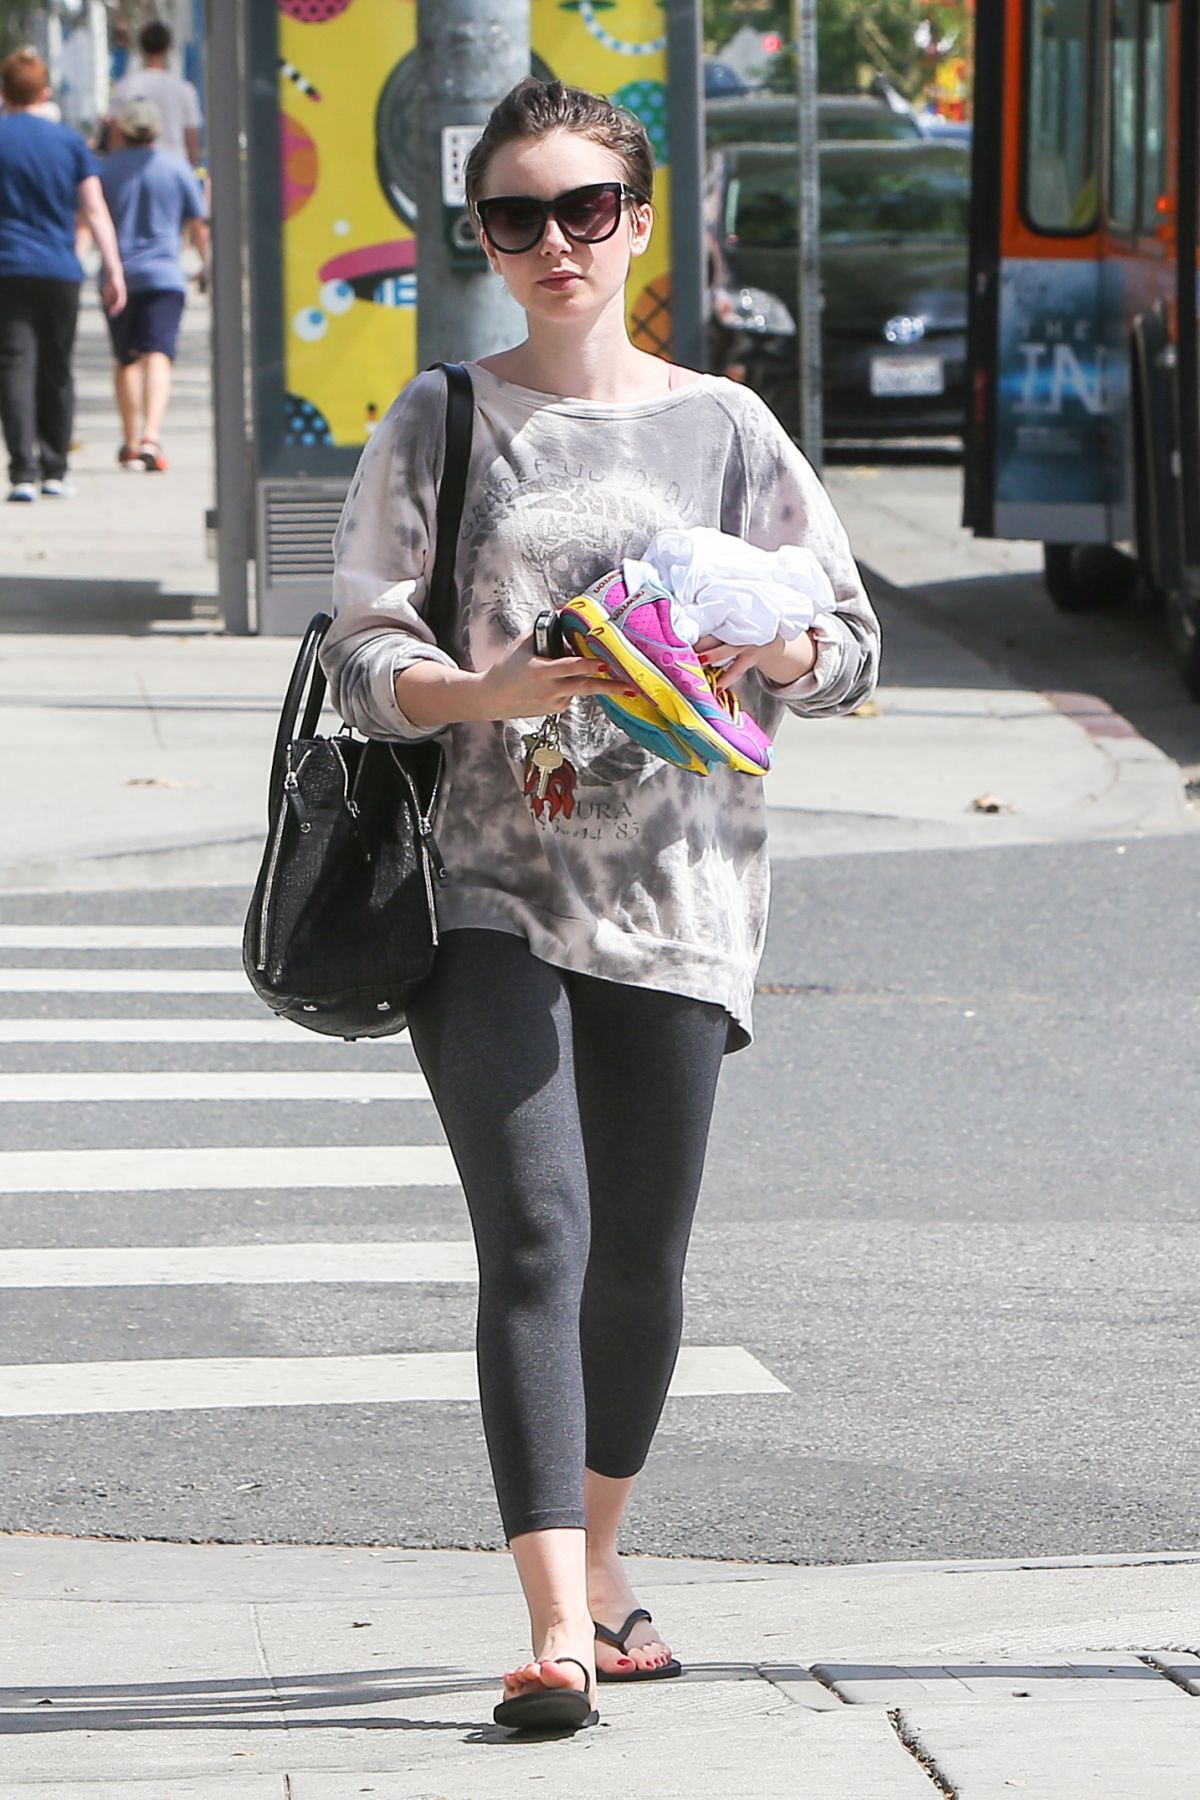 LILY COLLINS in Leggings Leaves a Gym in Eest Hollywood – HawtCelebs